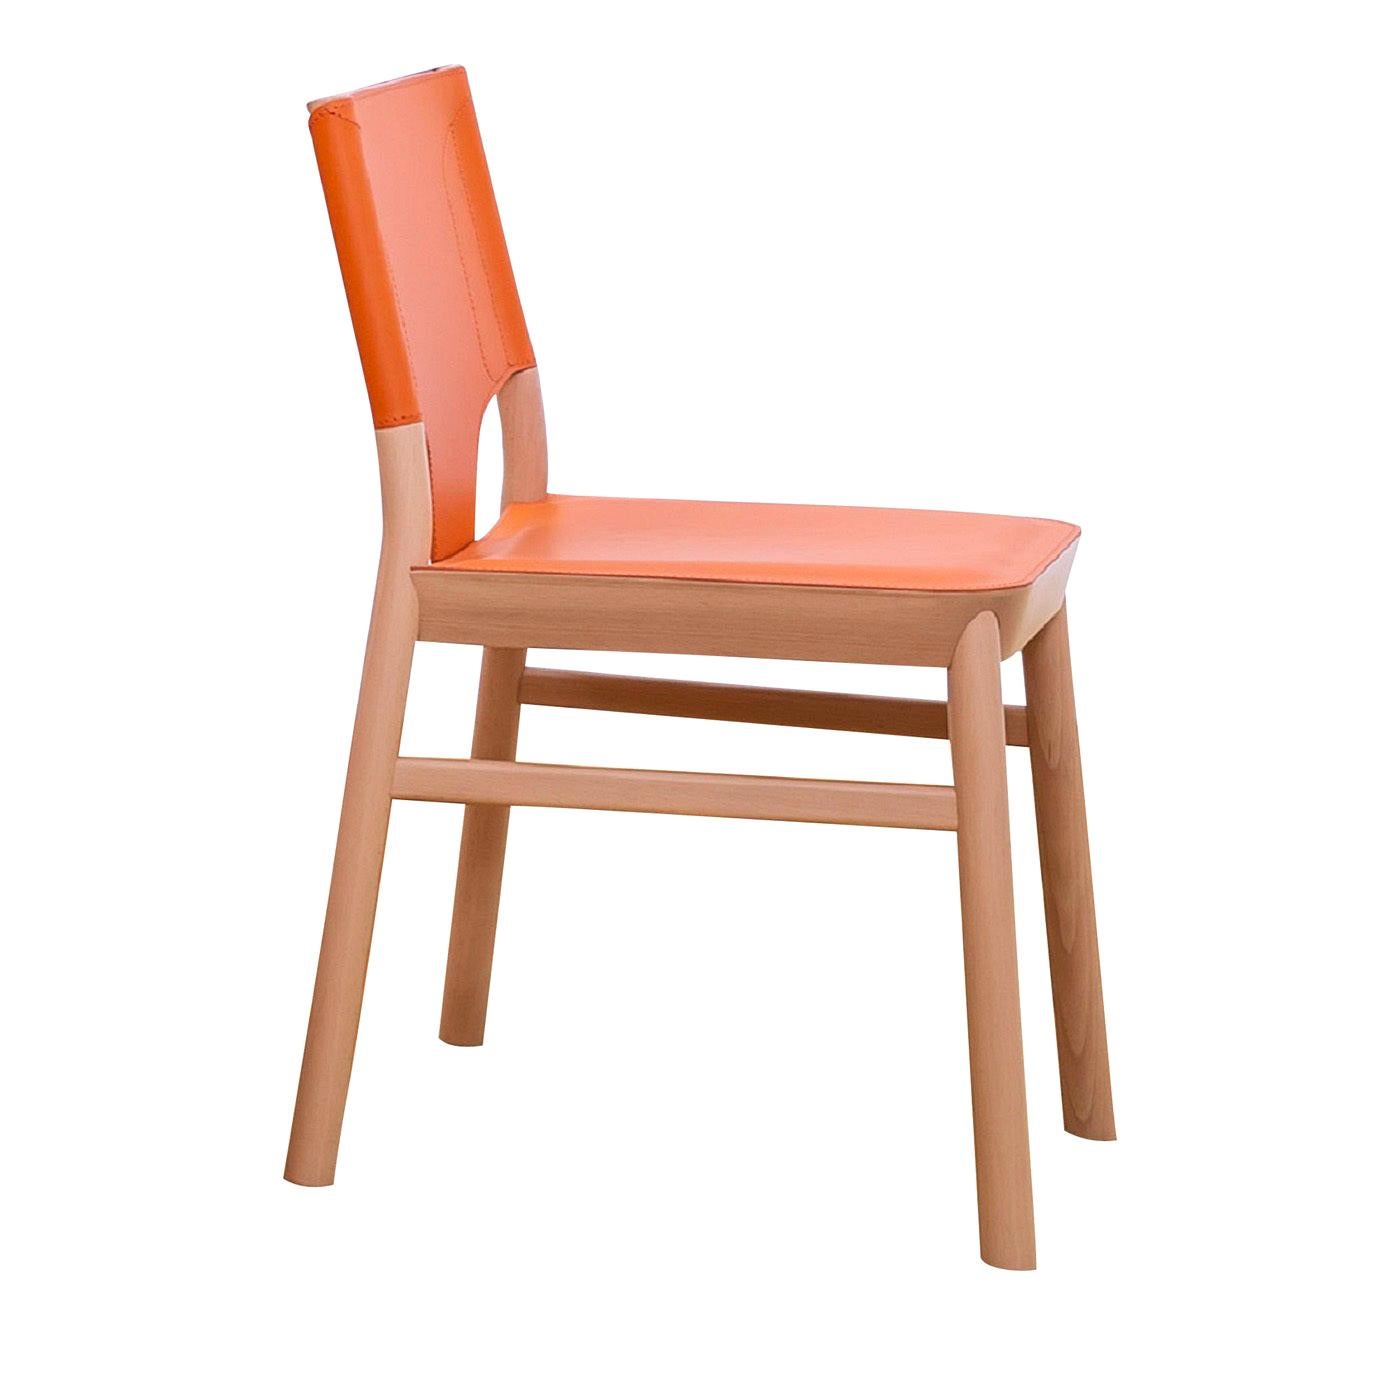 Marimba Dining Chair by Emilio Nanni For Sale